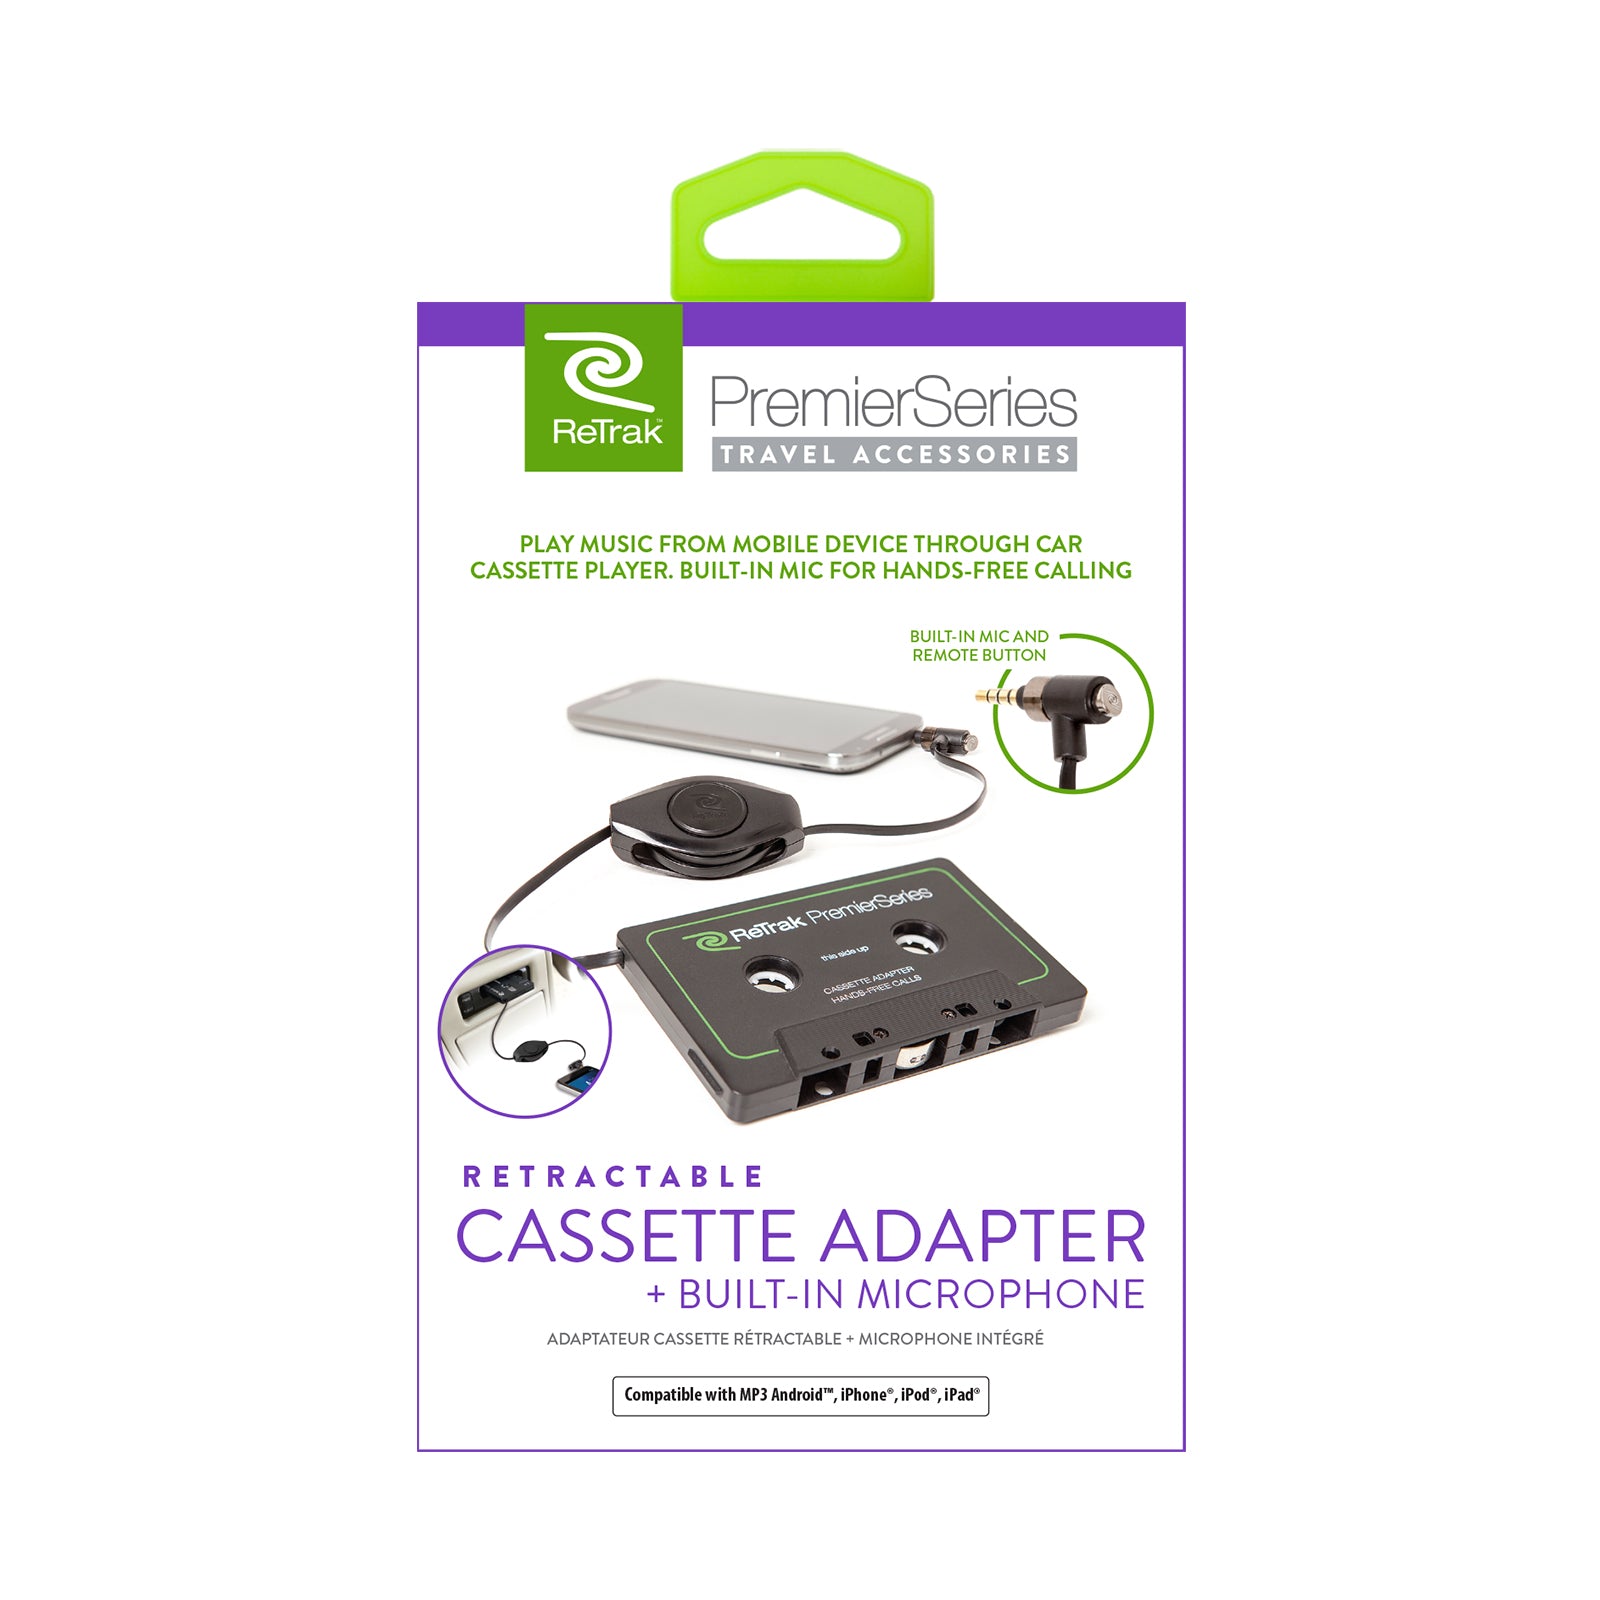 XM Radio Cassette Tape Adapter for universal iphone/ipod